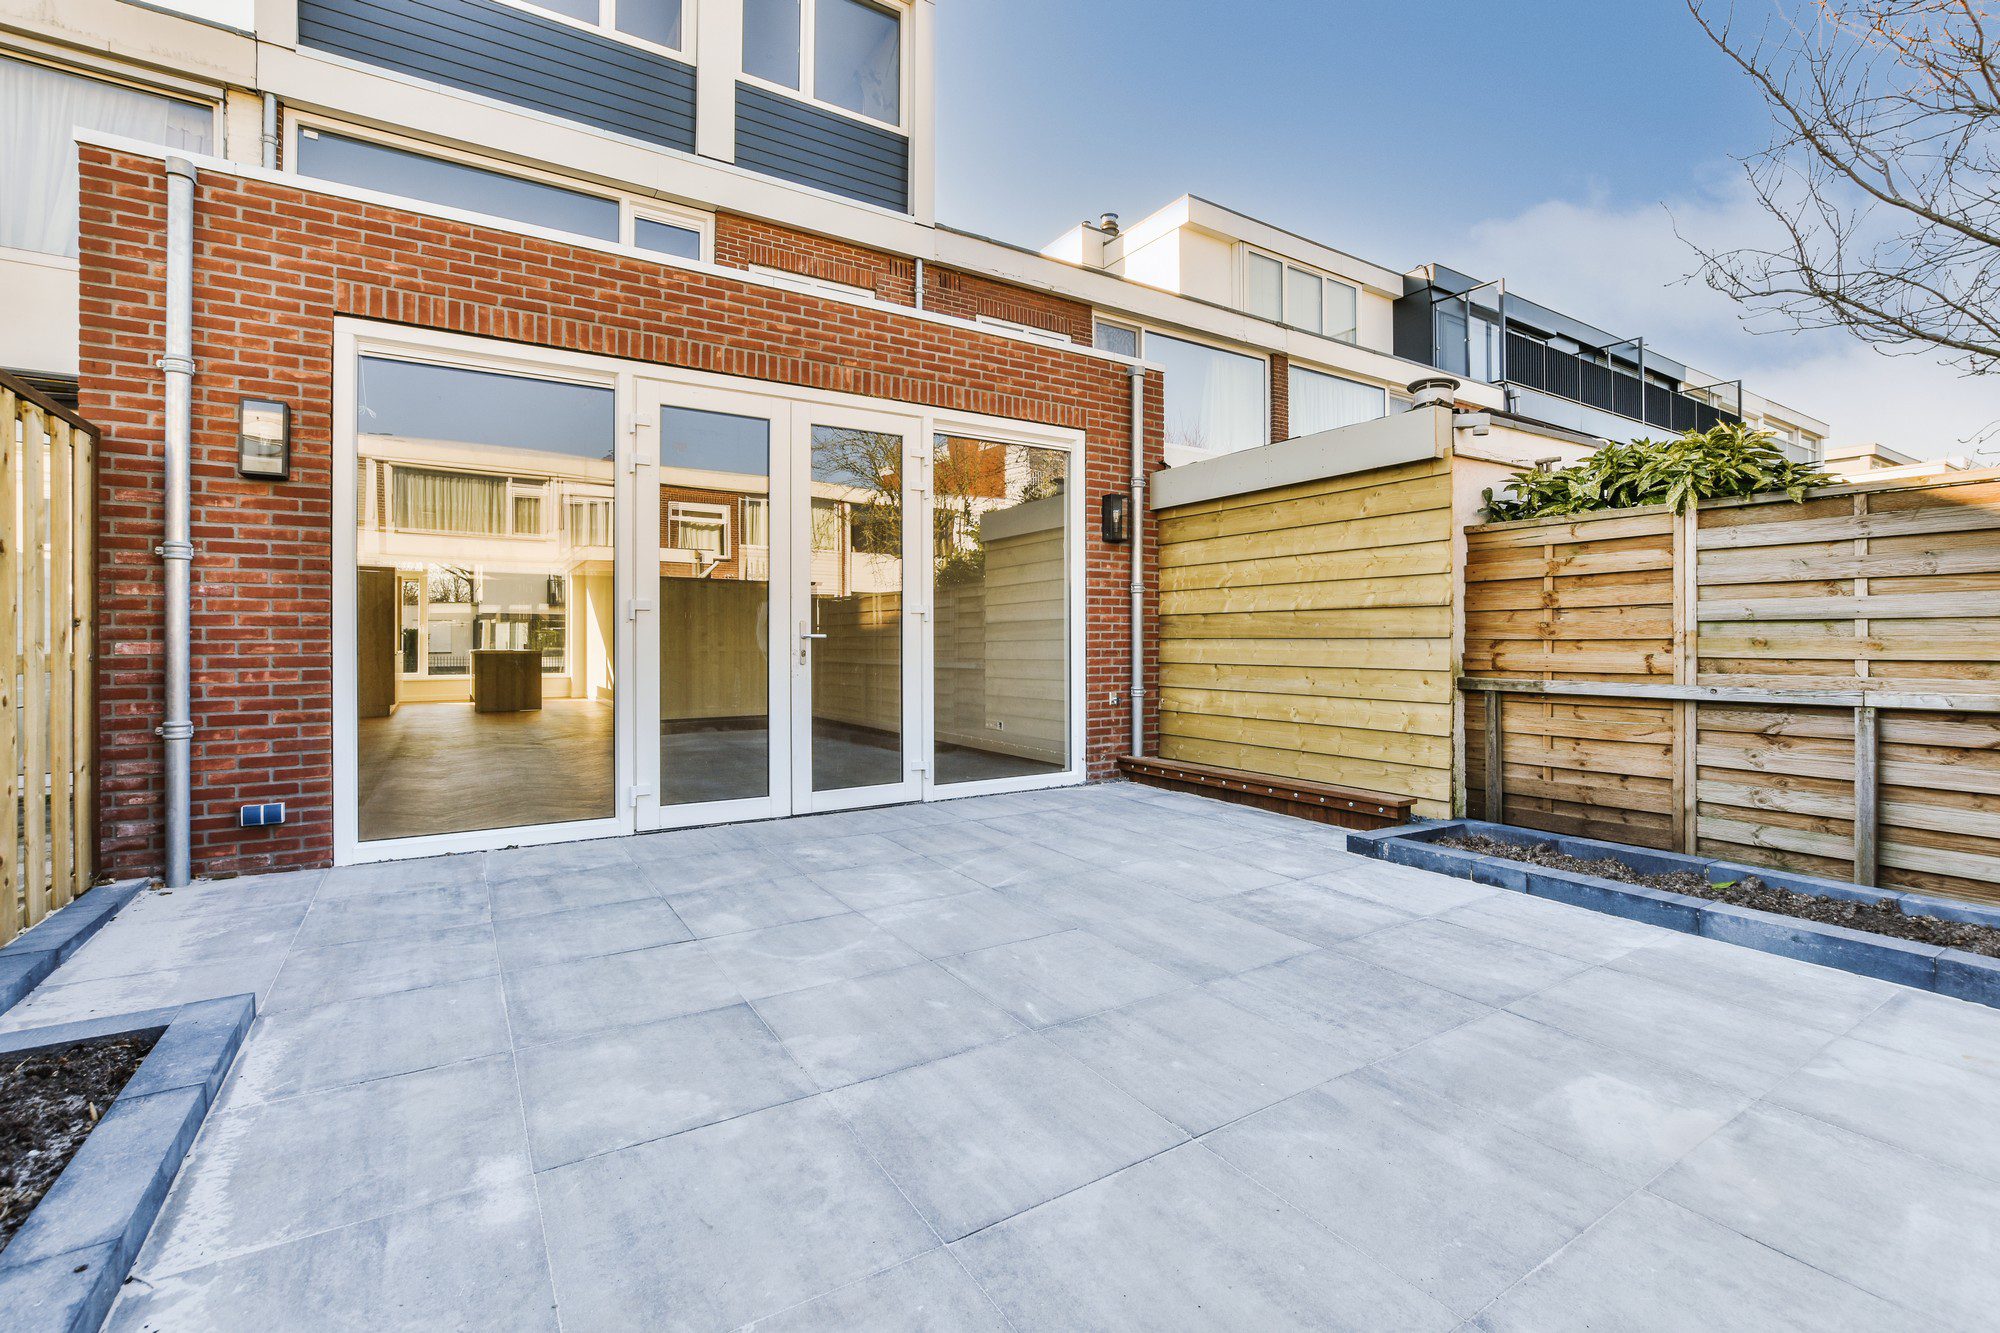 This is an image of a modern backyard patio of a house. The patio is paved with large, square, grey tiles. The house has a red brick facade combined with what looks to be a white cement or rendered finish on the upper parts, as well as large glass doors and windows allowing a view into the interior. On the right, there is a fence made of horizontal wooden slats and a small planted area at the base of the fence. On the upper level of the house, there is a balcony with a glass railing. The sky is clear, which suggests that the photo was taken on a sunny day.